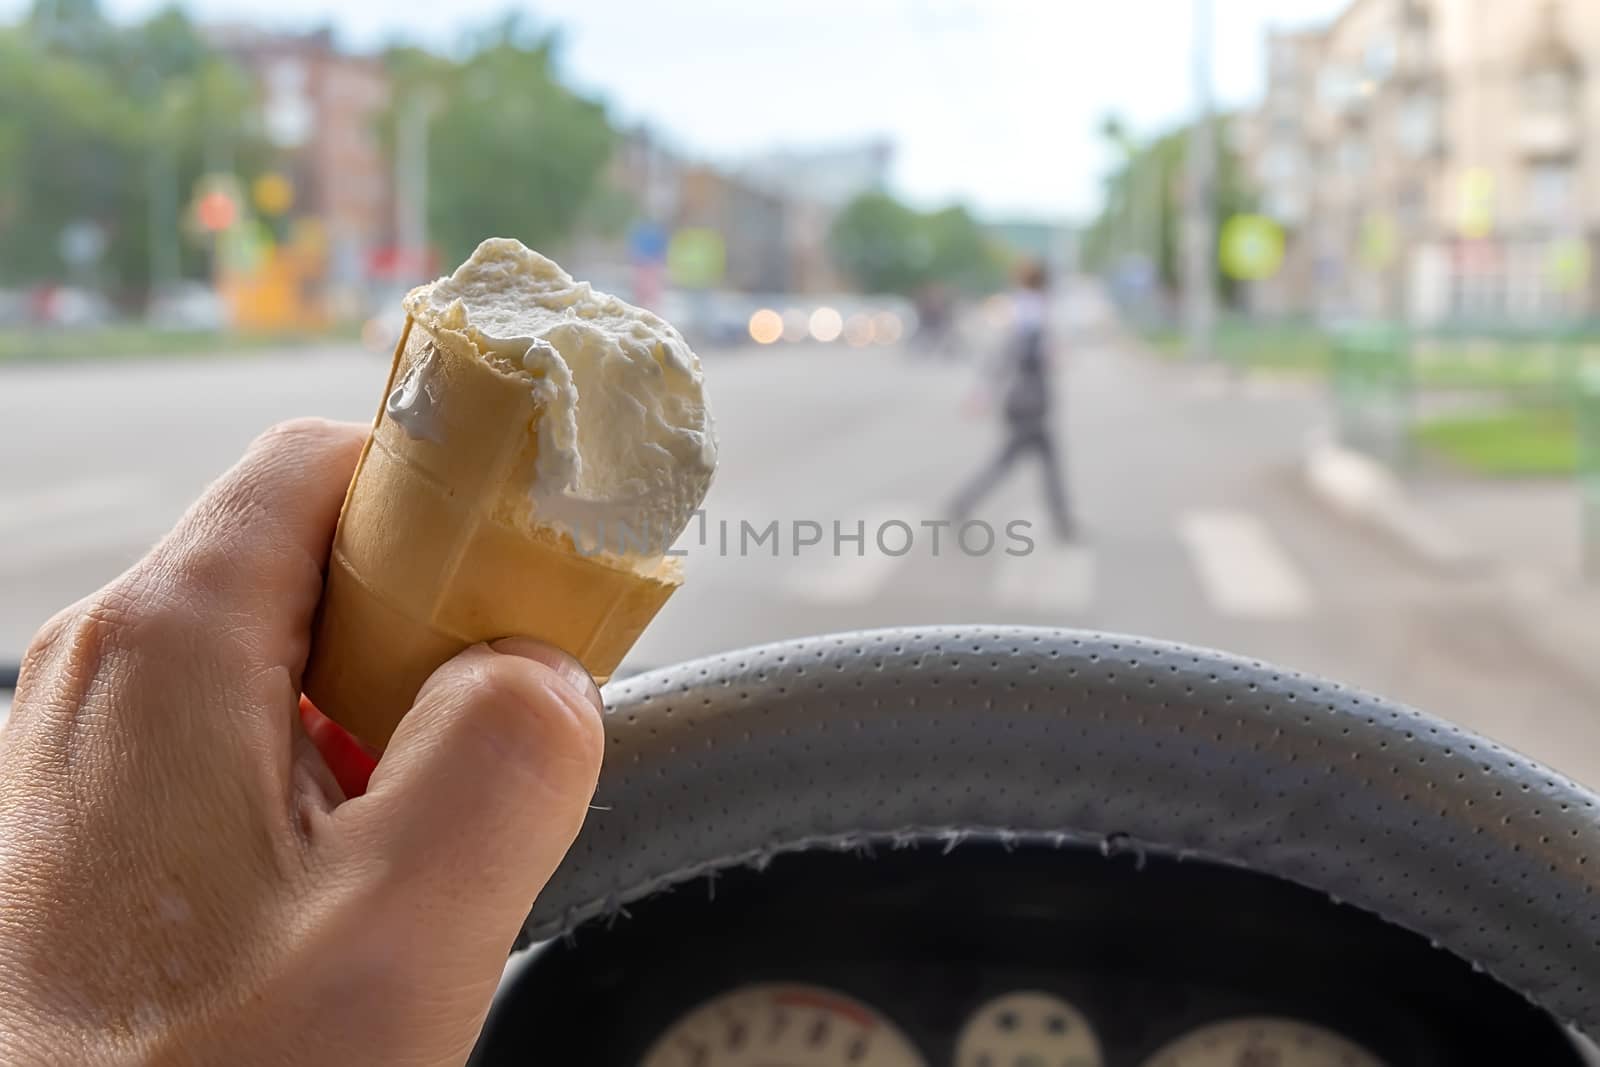 the driver holds the ice cream while driving a car by jk3030